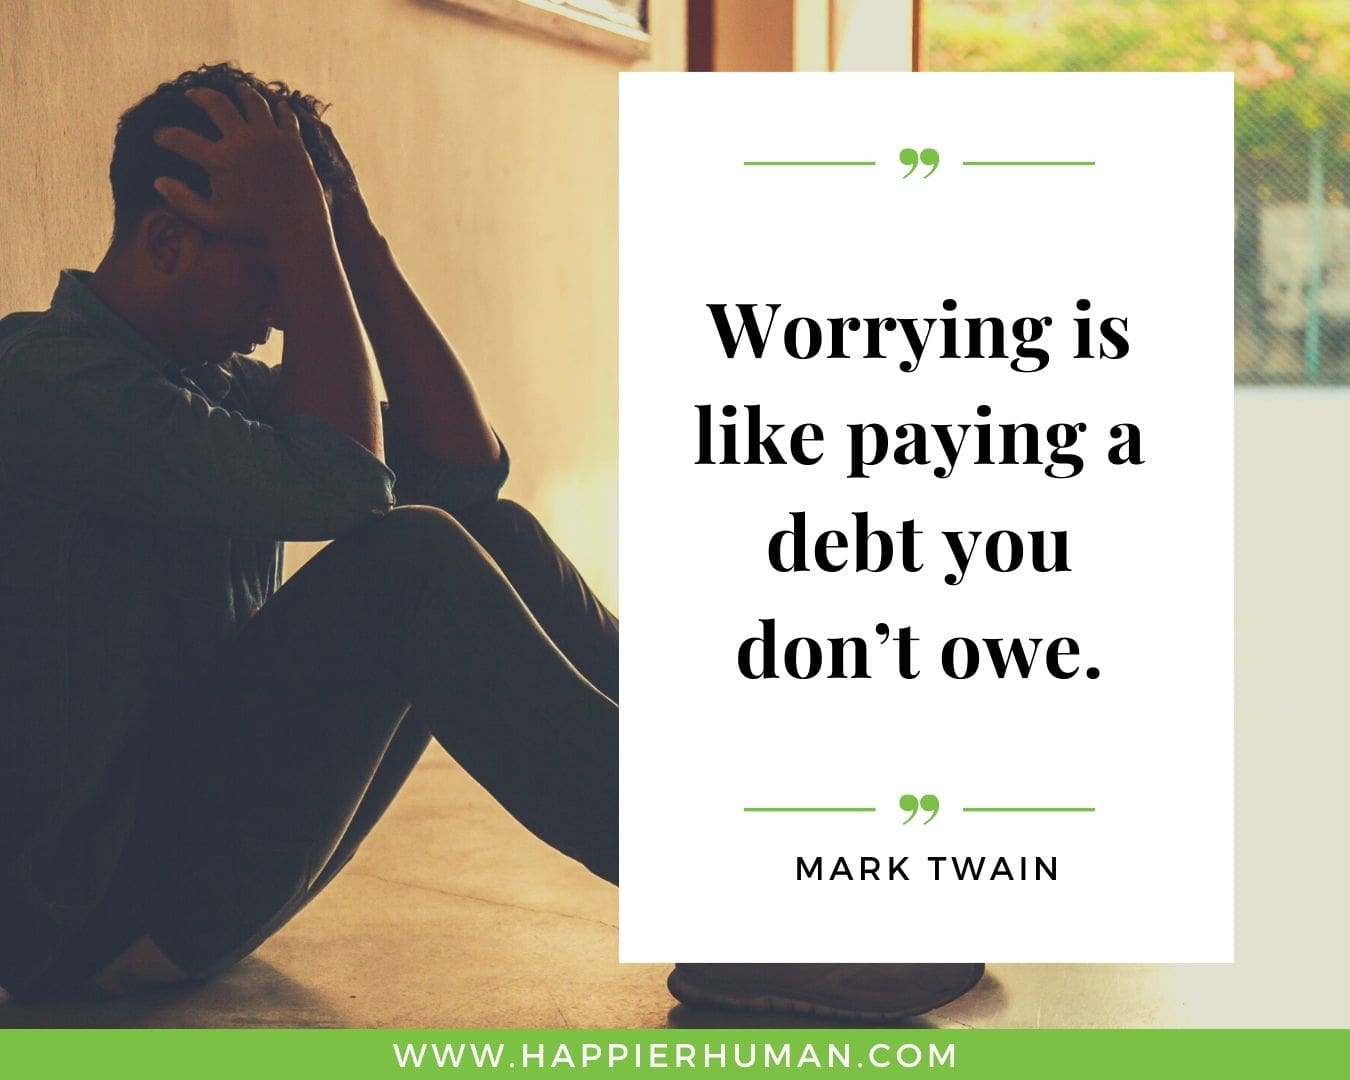 Overthinking Quotes - “Worrying is like paying a debt you don’t owe.” - Mark Twain